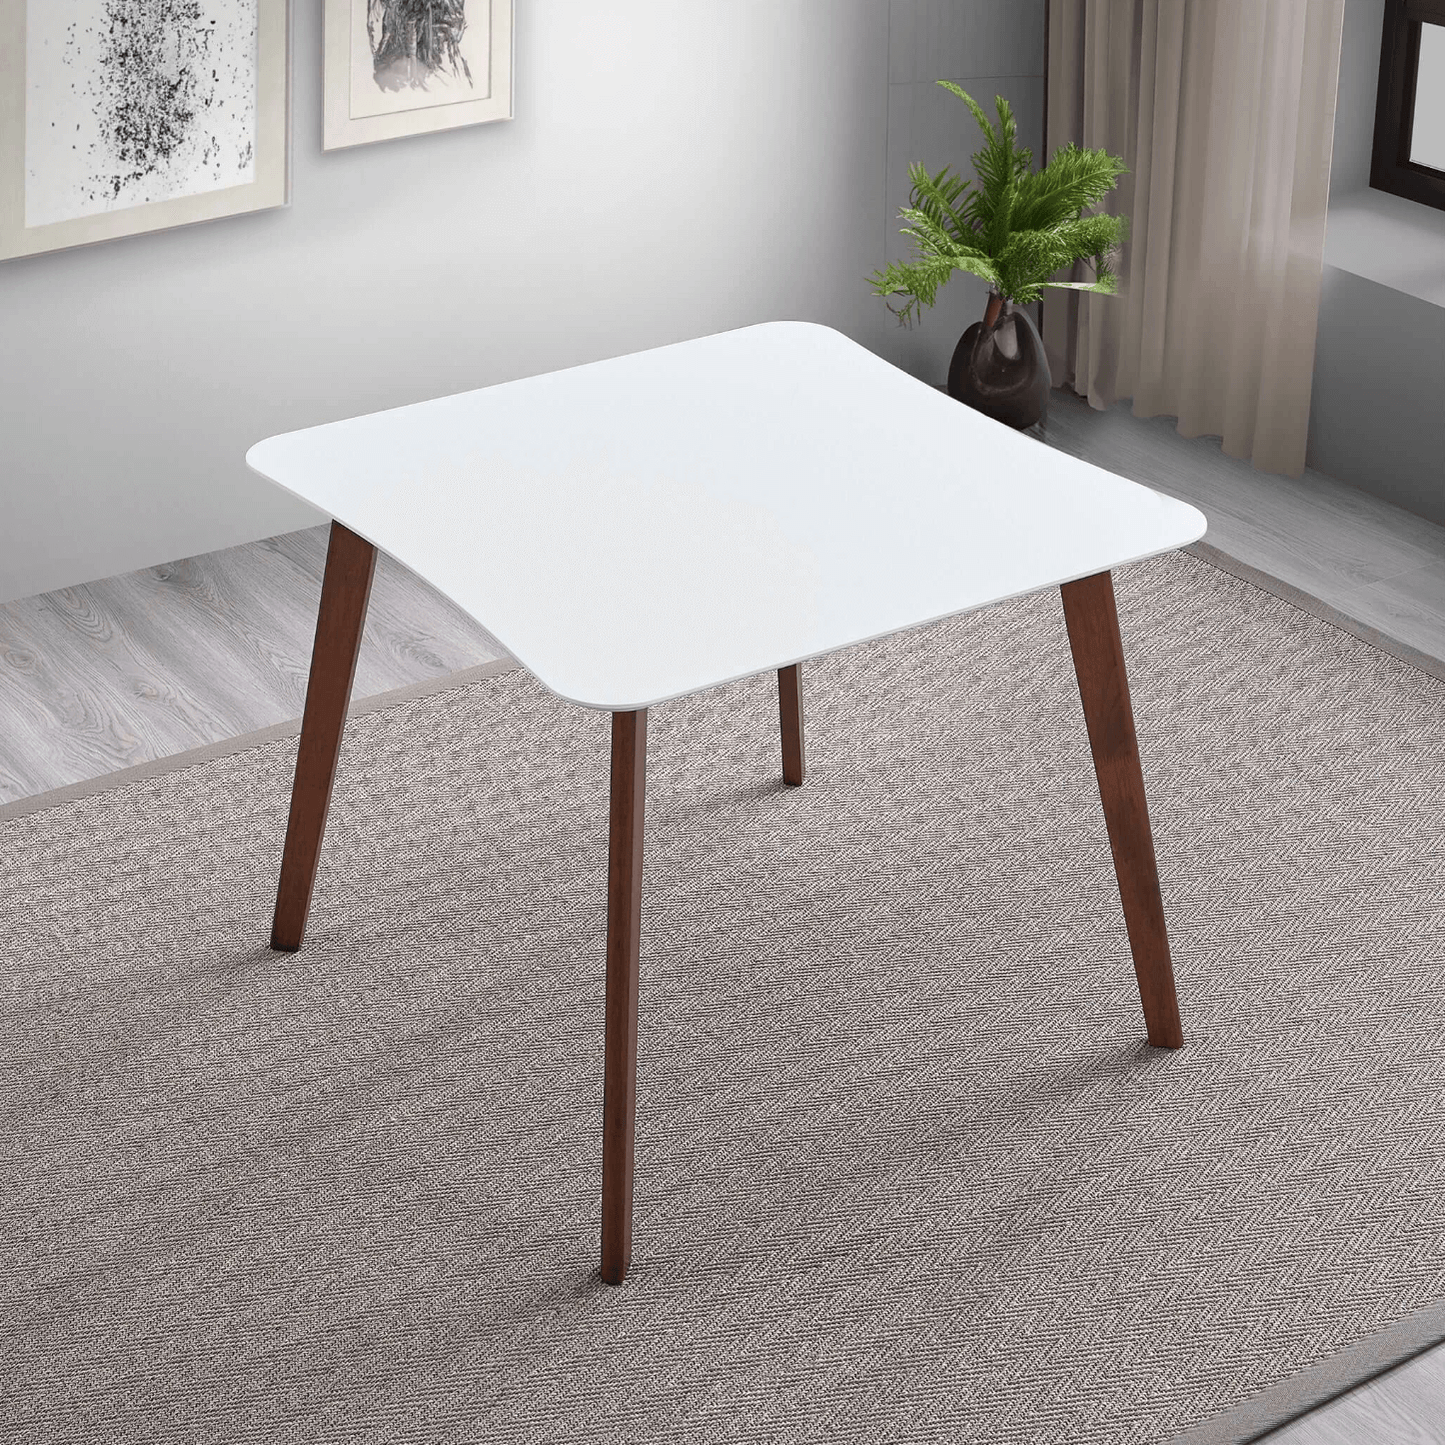 Bloom MCM Styled Square Wood Dining Table, White Top 35" - Revel Sofa 